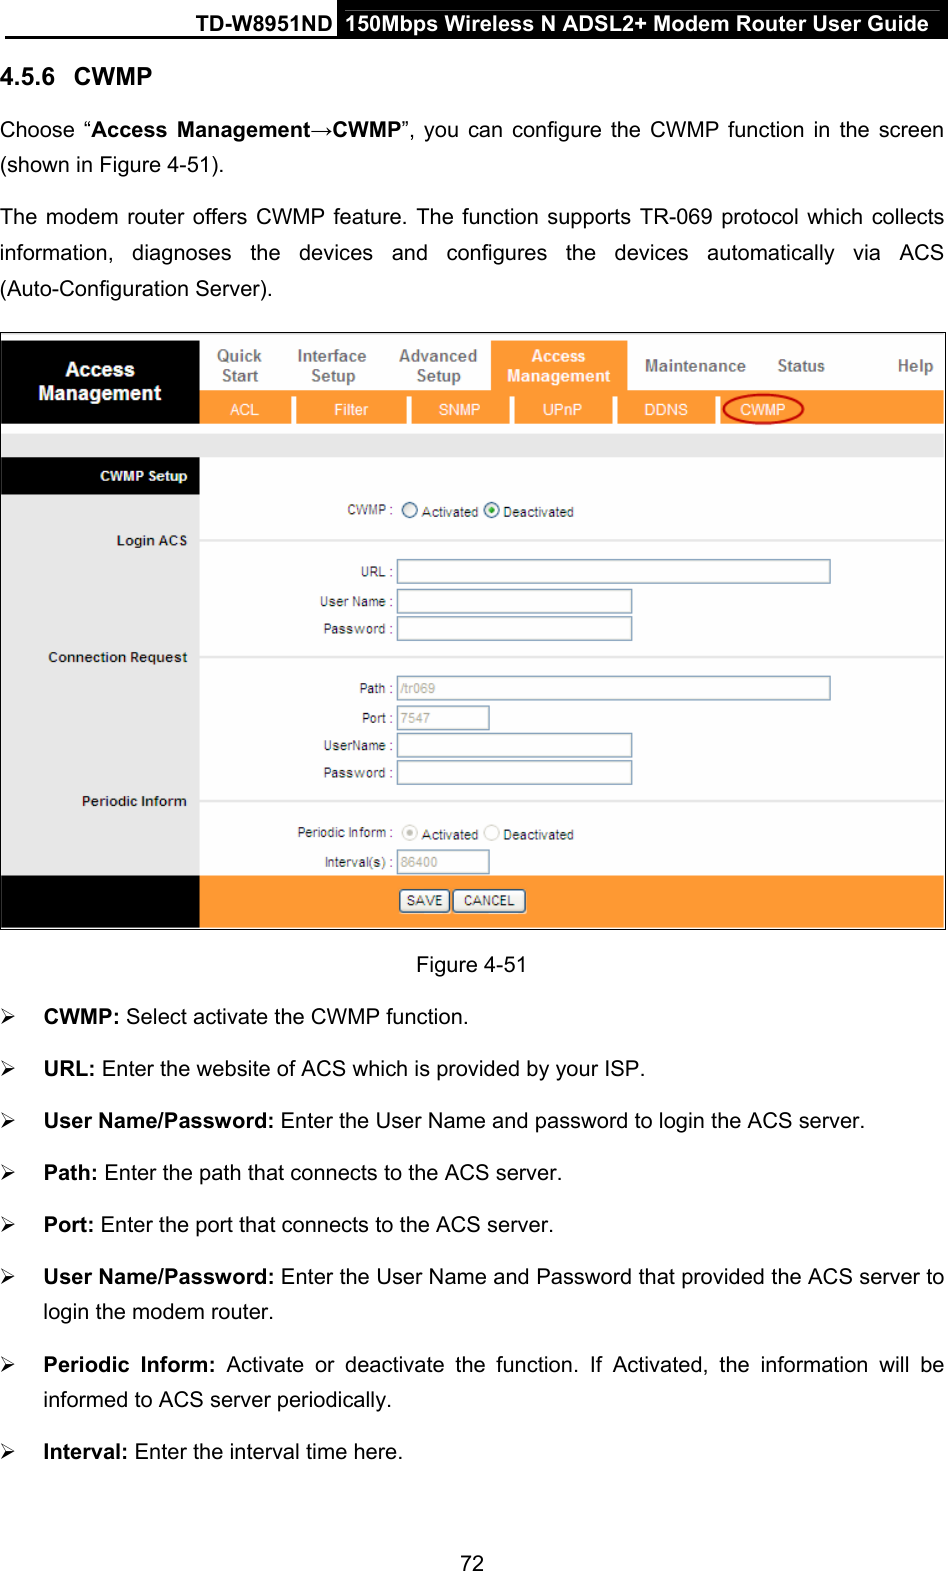 TD-W8951ND  150Mbps Wireless N ADSL2+ Modem Router User Guide 4.5.6  CWMP Choose “Access Management→CWMP”, you can configure the CWMP function in the screen (shown in Figure 4-51). The modem router offers CWMP feature. The function supports TR-069 protocol which collects information, diagnoses the devices and configures the devices automatically via ACS (Auto-Configuration Server).  Figure 4-51  CWMP: Select activate the CWMP function.  URL: Enter the website of ACS which is provided by your ISP.  User Name/Password: Enter the User Name and password to login the ACS server.  Path: Enter the path that connects to the ACS server.  Port: Enter the port that connects to the ACS server.  User Name/Password: Enter the User Name and Password that provided the ACS server to login the modem router.  Periodic Inform: Activate or deactivate the function. If Activated, the information will be informed to ACS server periodically.  Interval: Enter the interval time here. 72 